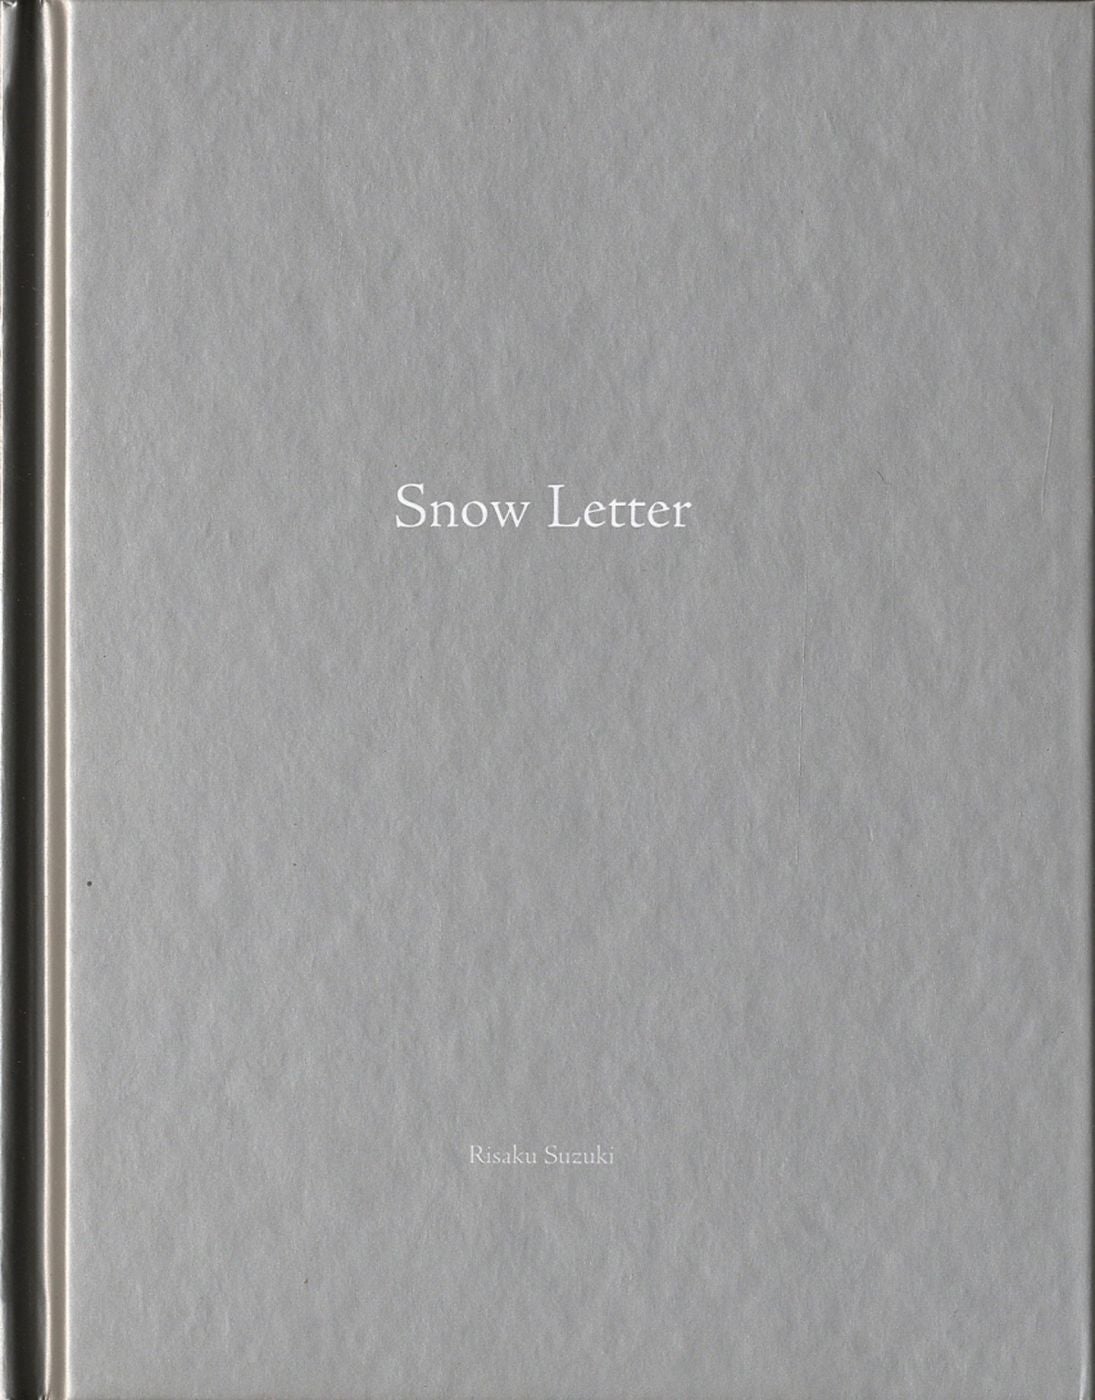 Risaku Suzuki: Snow Letter (One Picture Book #80), Limited Edition (with Print)